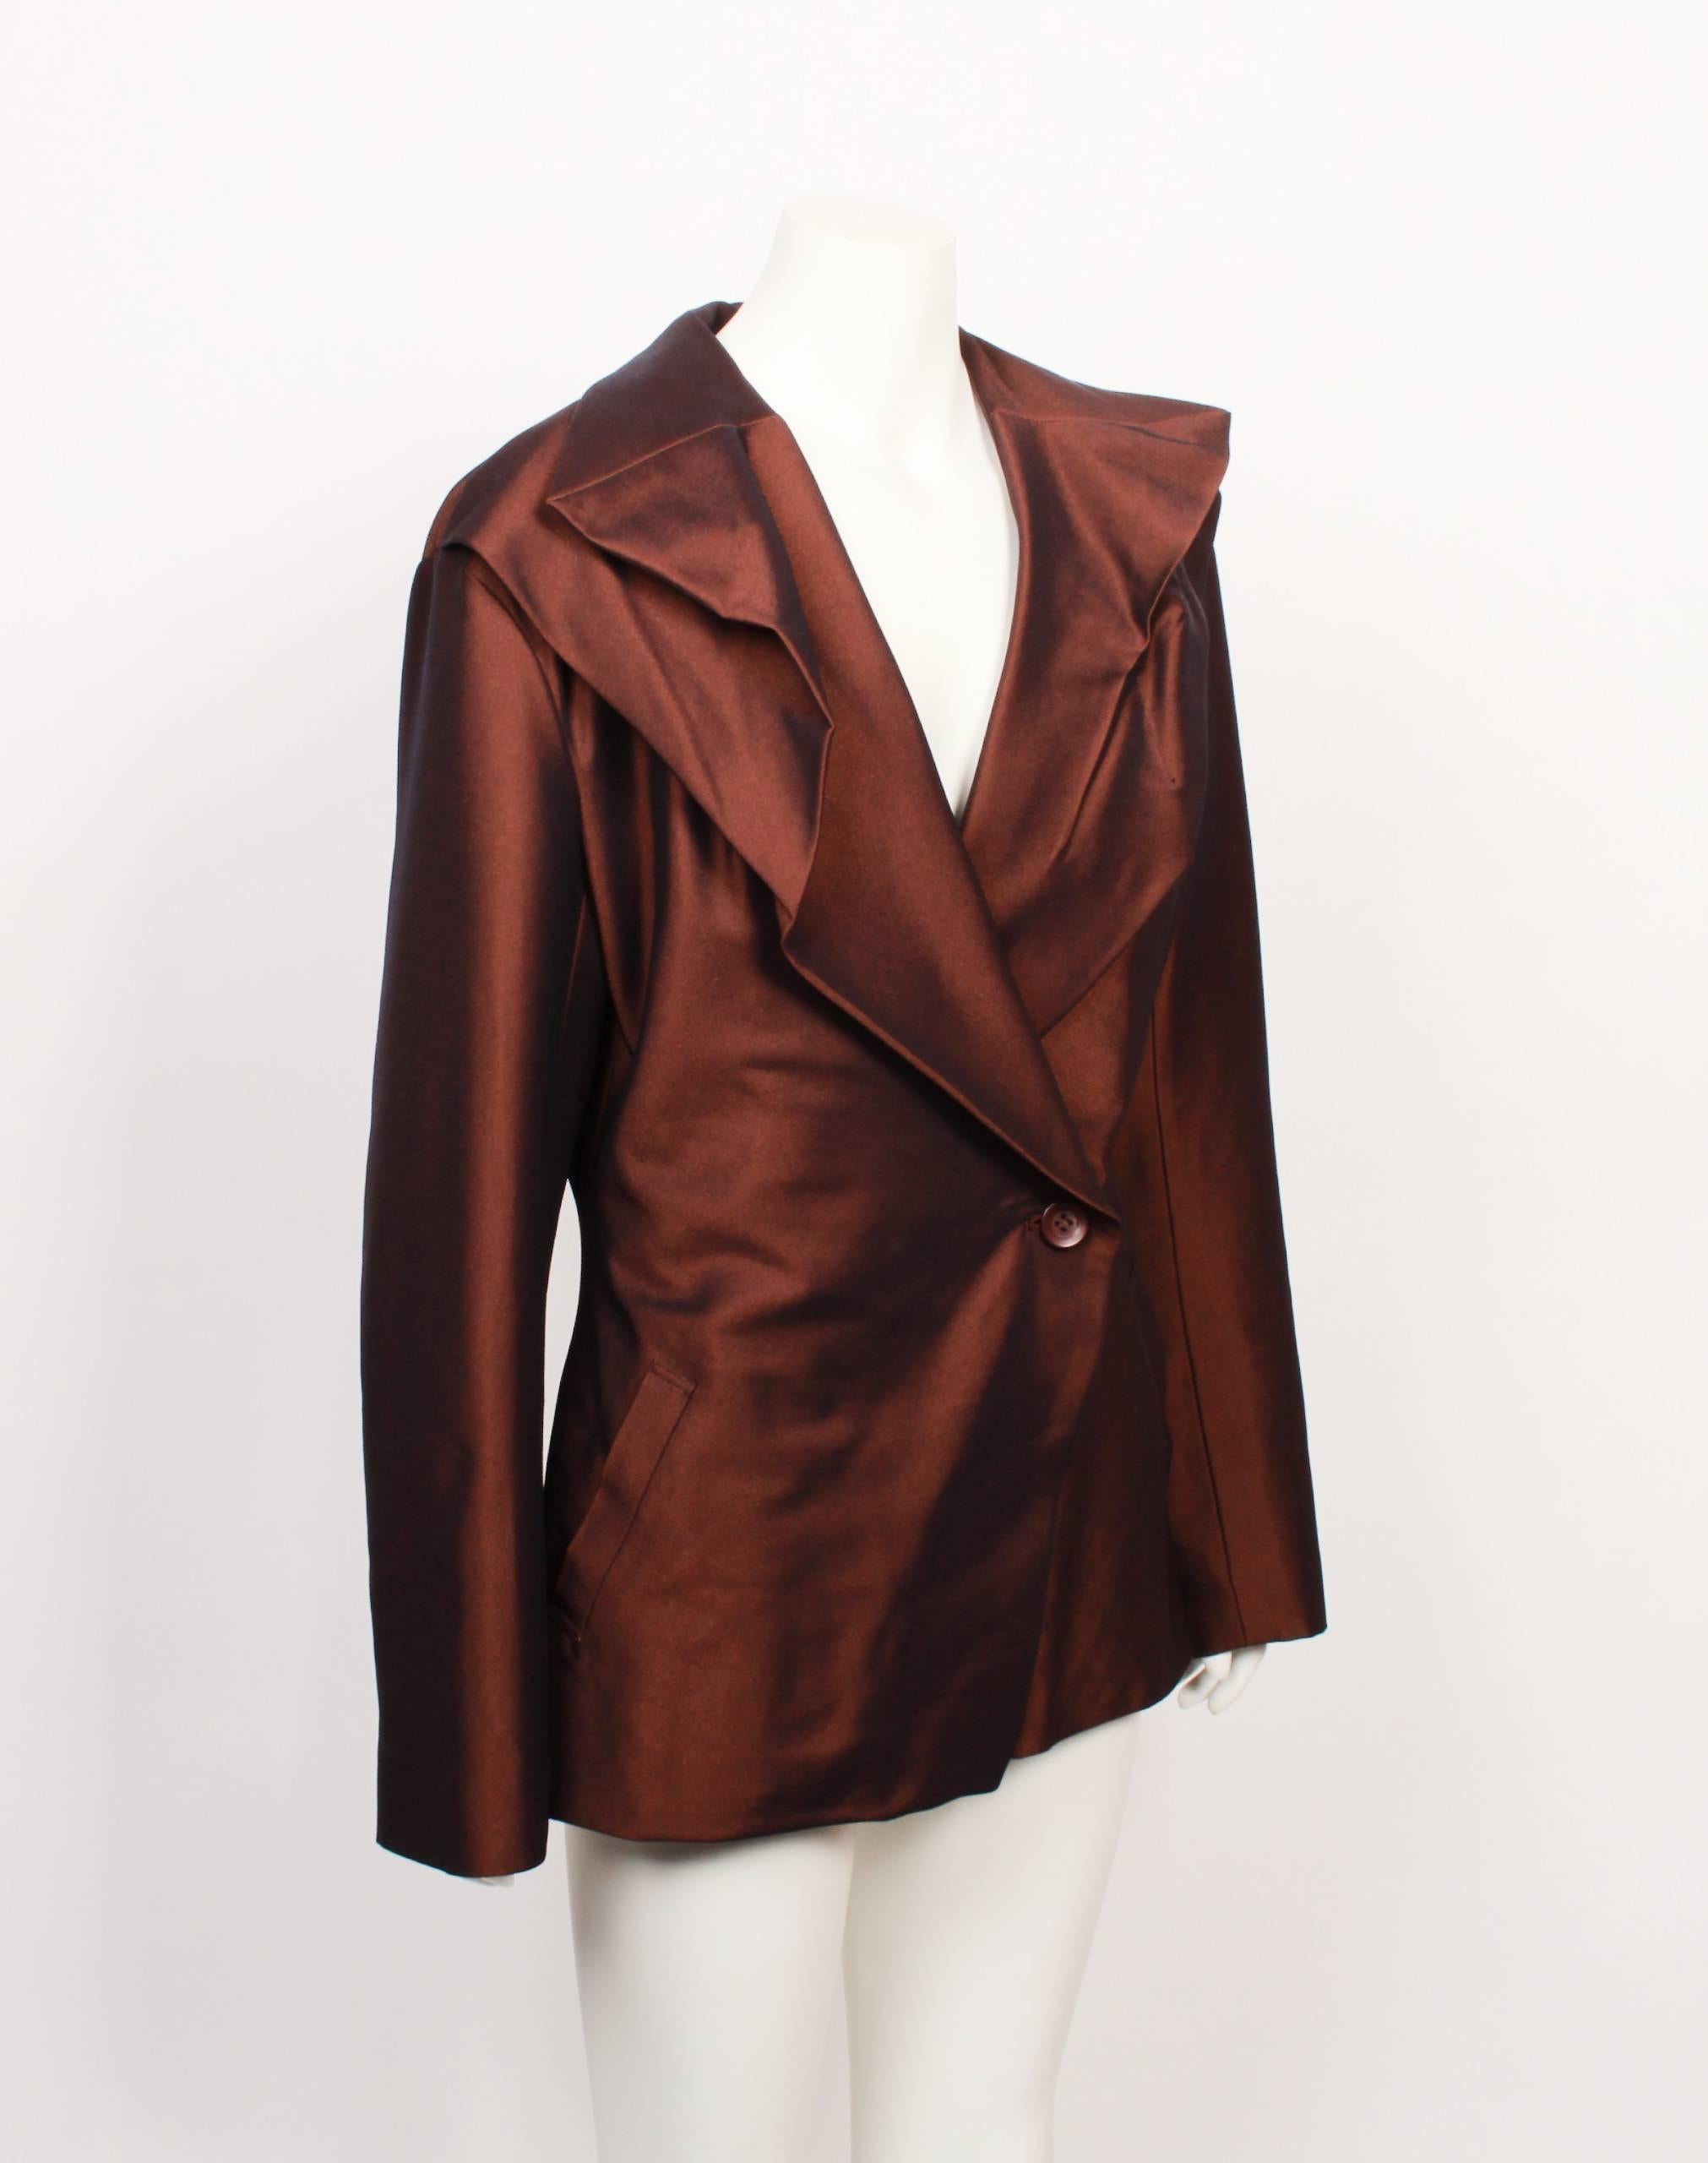 Copper/brown Jacket.
Detailed Lapels
Size Marked XL

